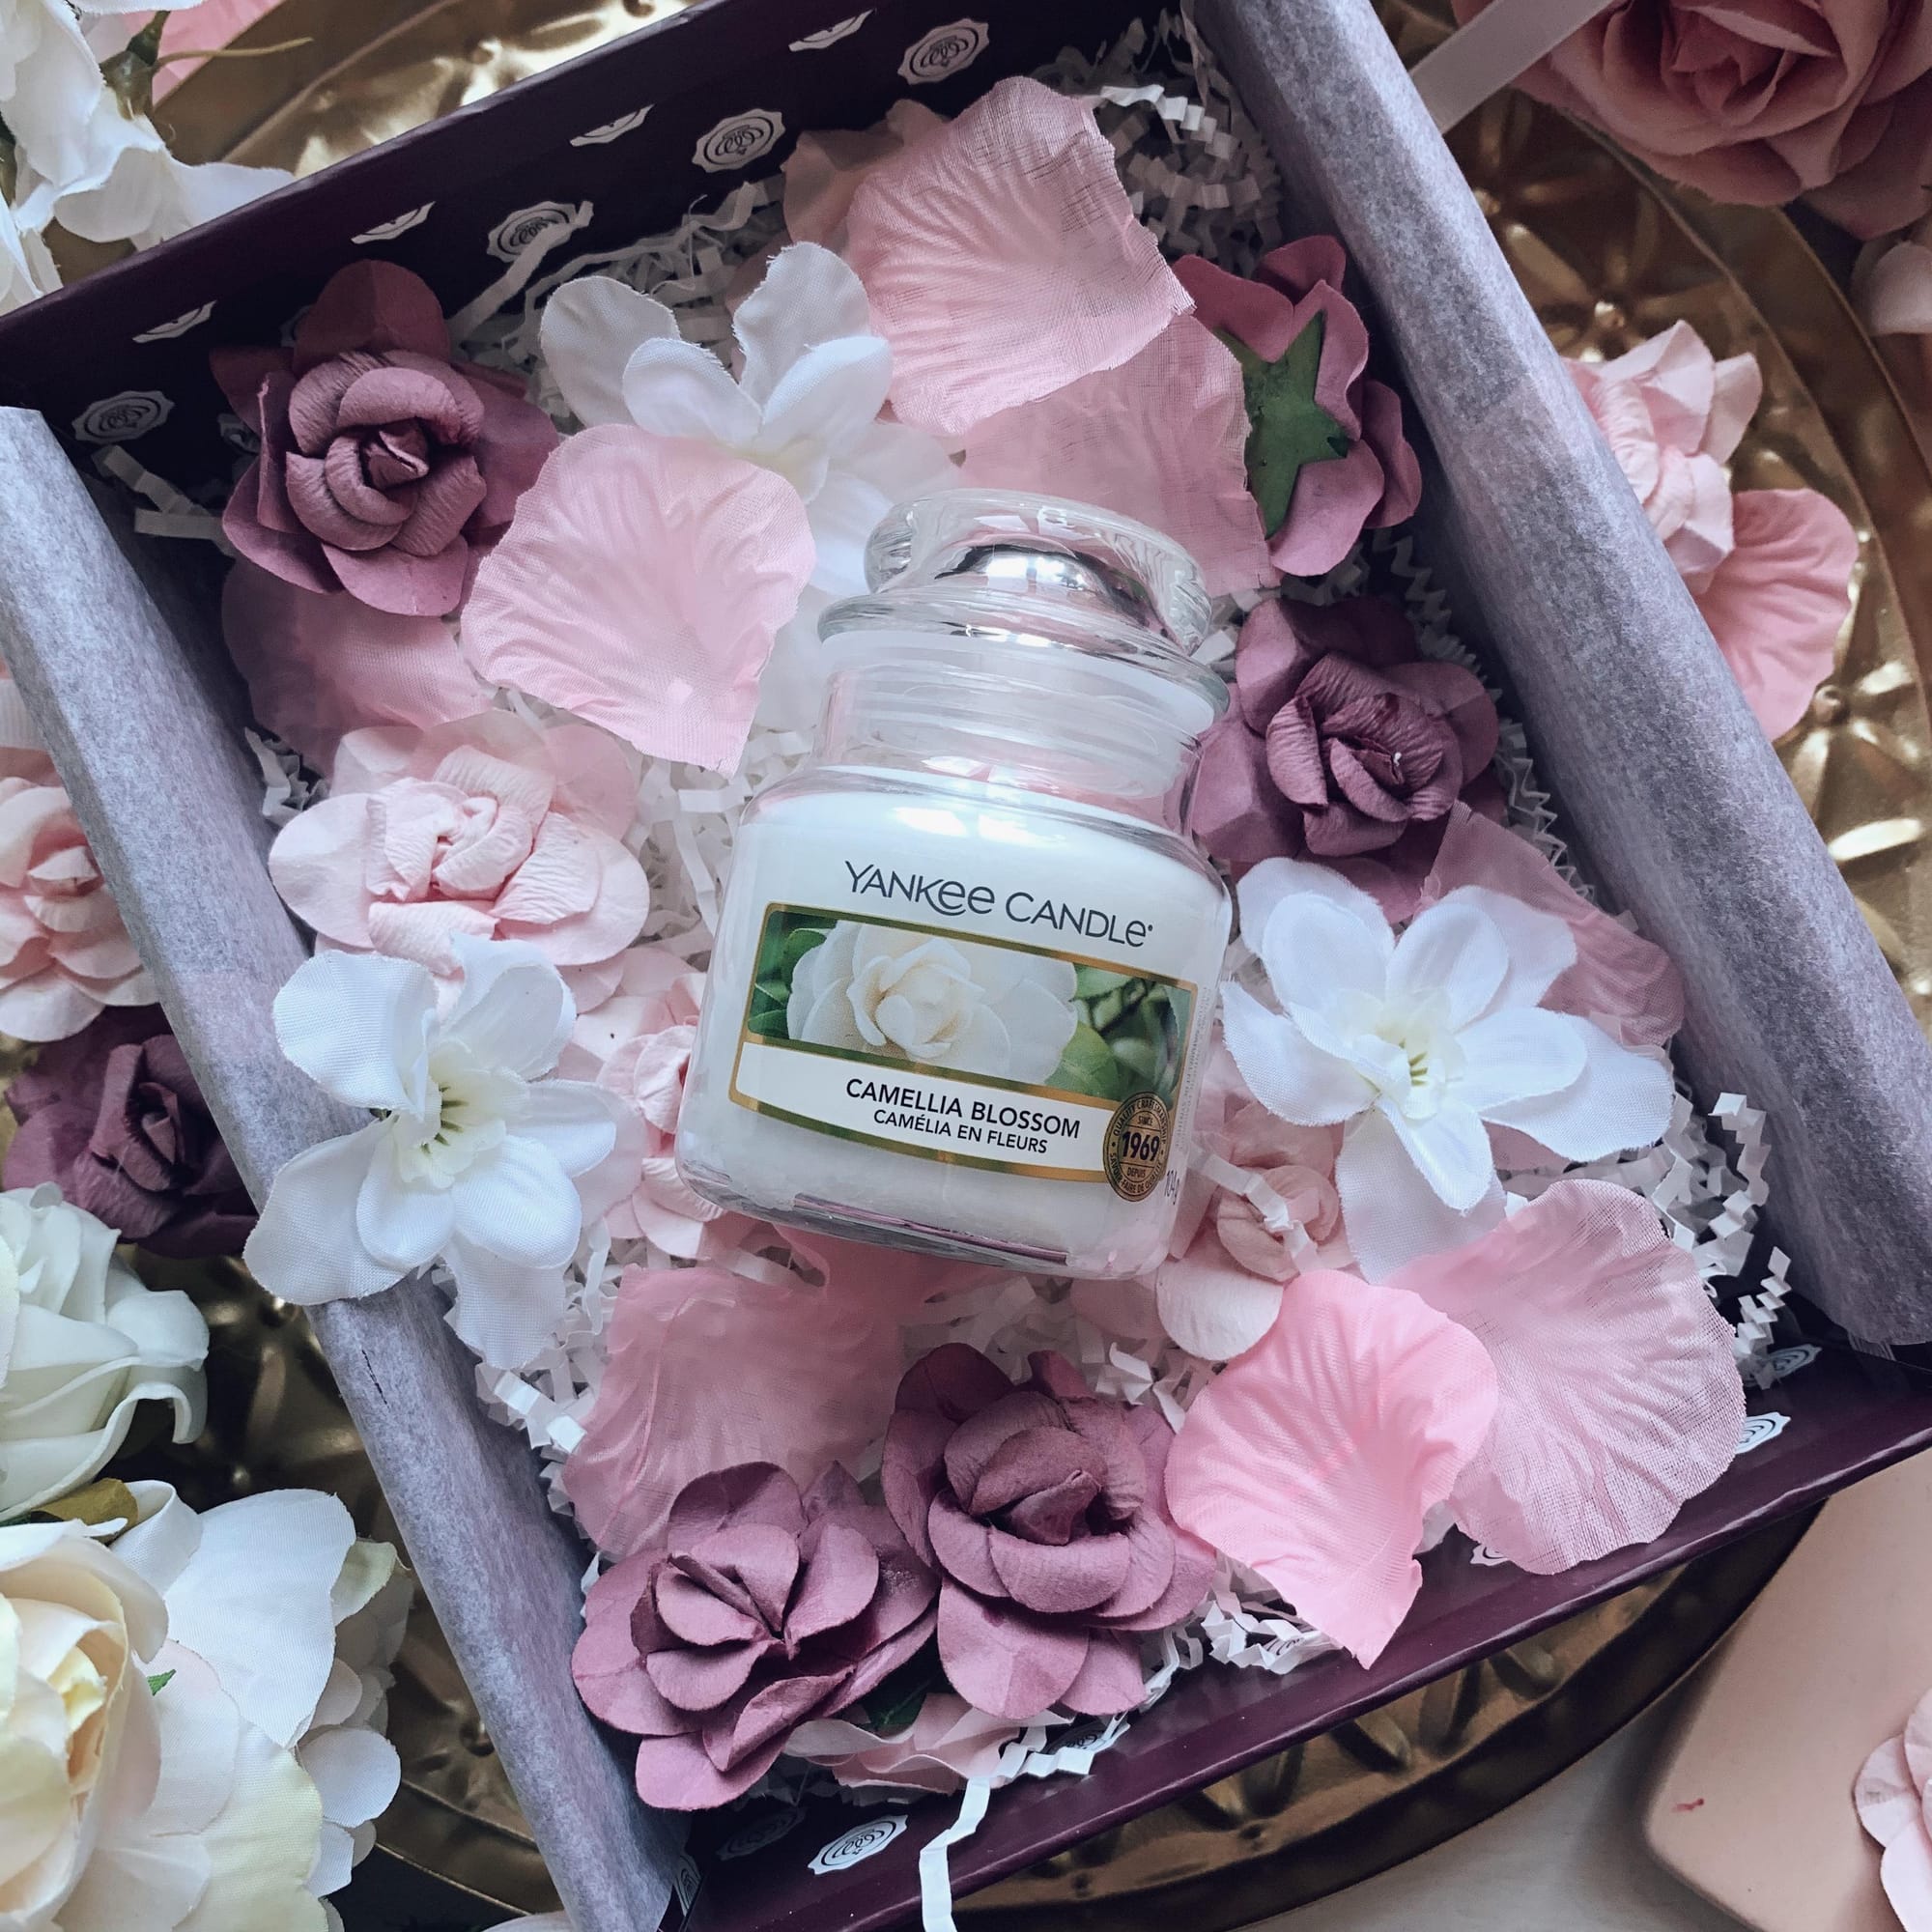 Yankee Candle Small Jar Candle Camellia Blossom - Only For You - Limited Edition Mother's Day Glossybox 2020 Review - Miss Boux